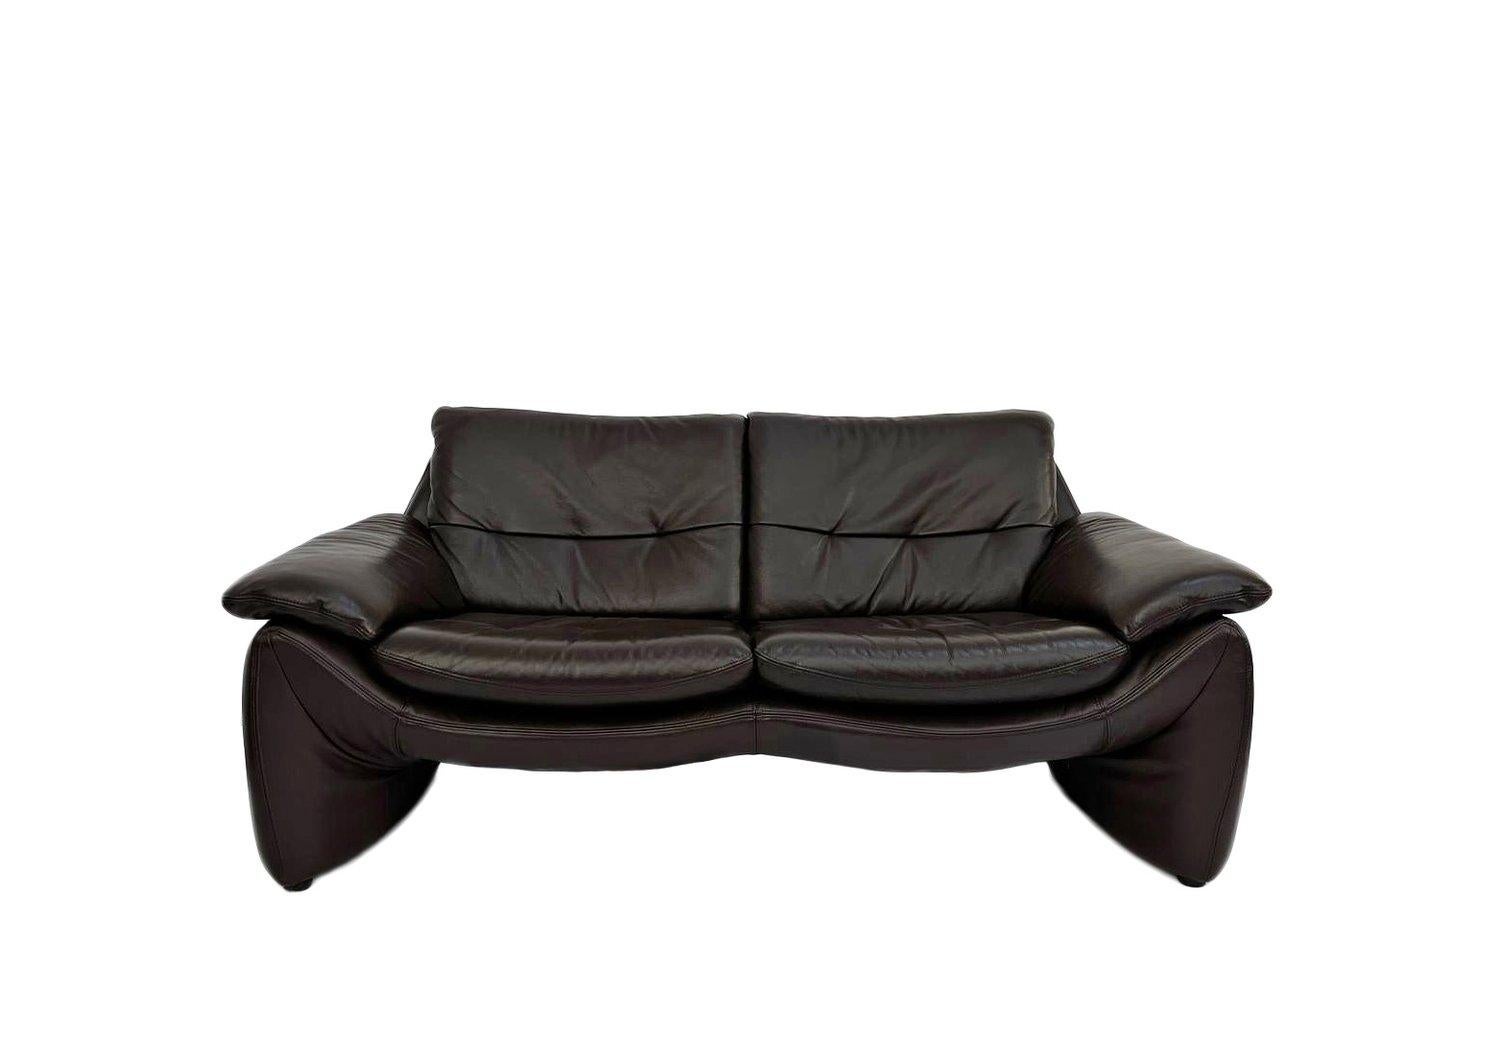 A beautiful Danish dark brown leather large 2 seater sofa, this would make a stylish addition to any living or work area.

The sofa has wide seats and padded armrests for enhanced comfort. A striking piece of classic Scandinavian furniture.

The